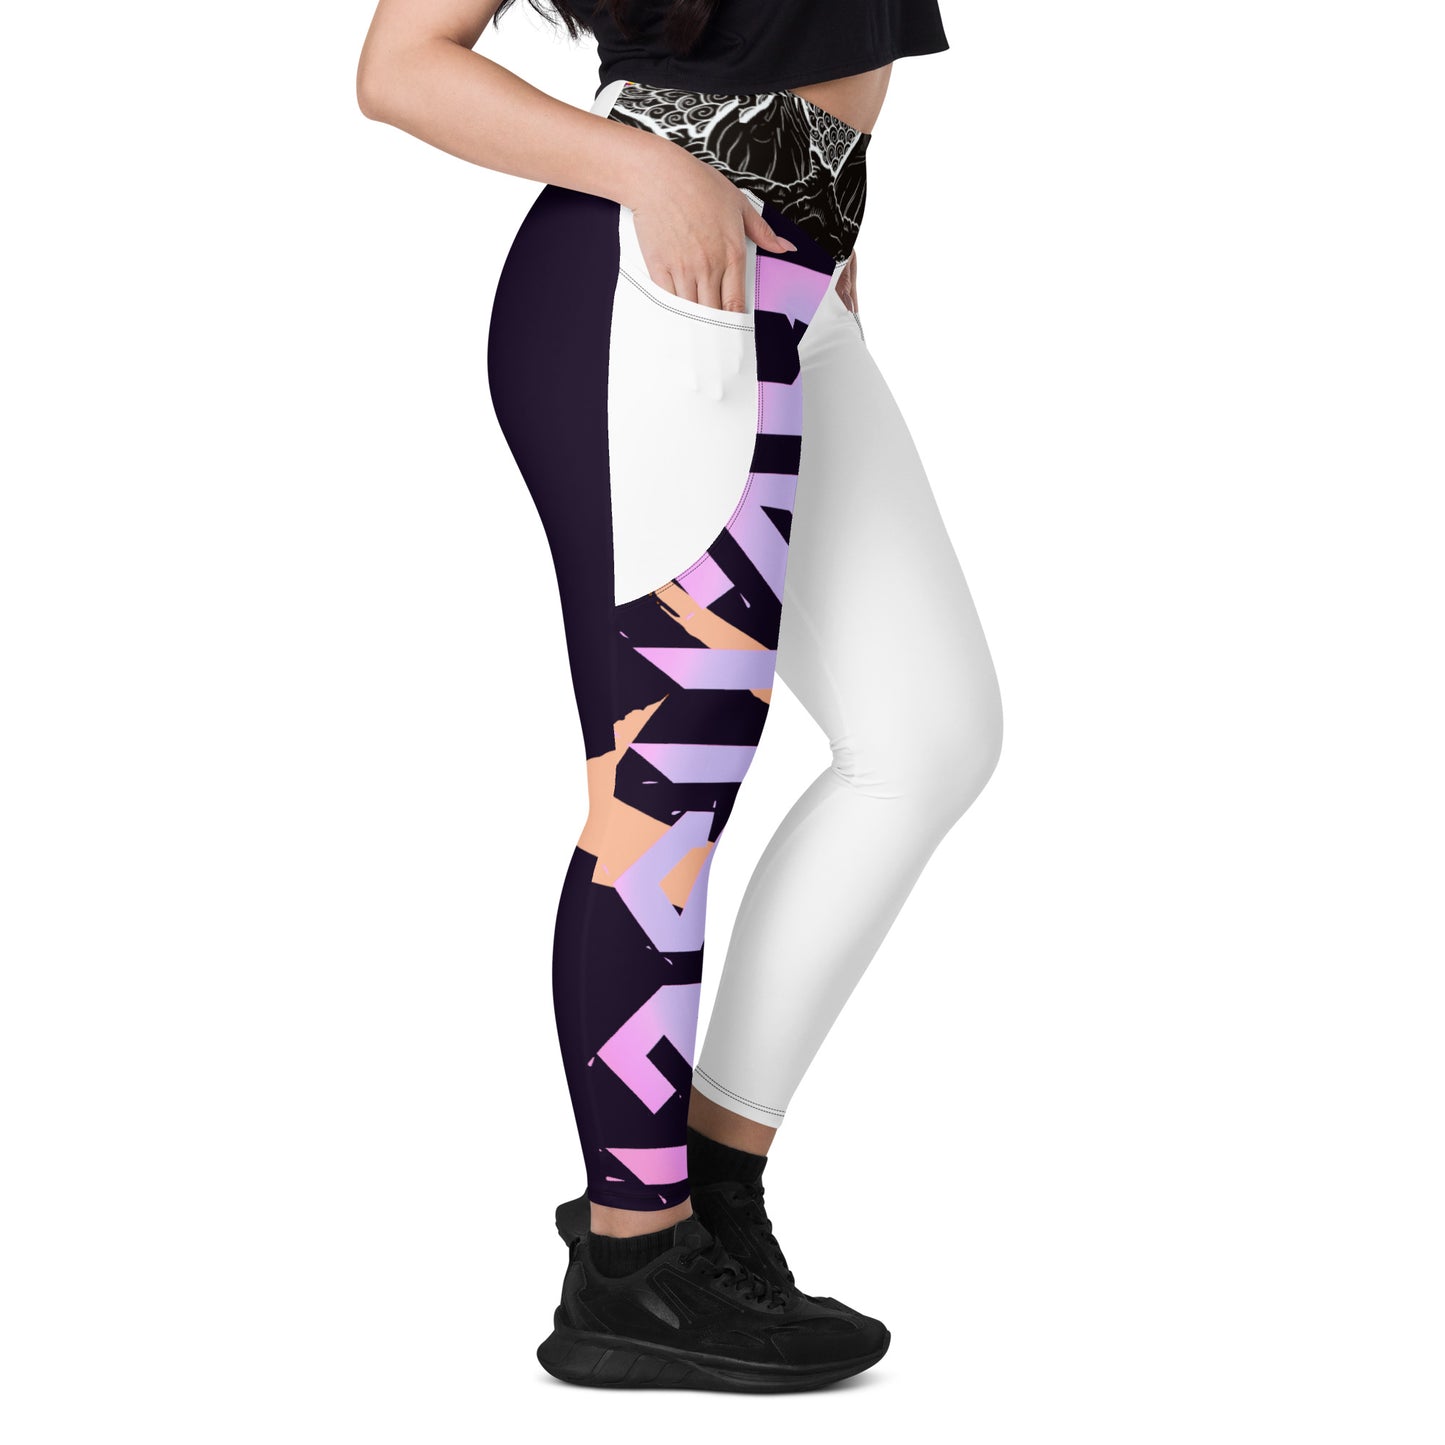 "KENSEI x X37" - Leggings with Pockets, We know. "We Got You!"